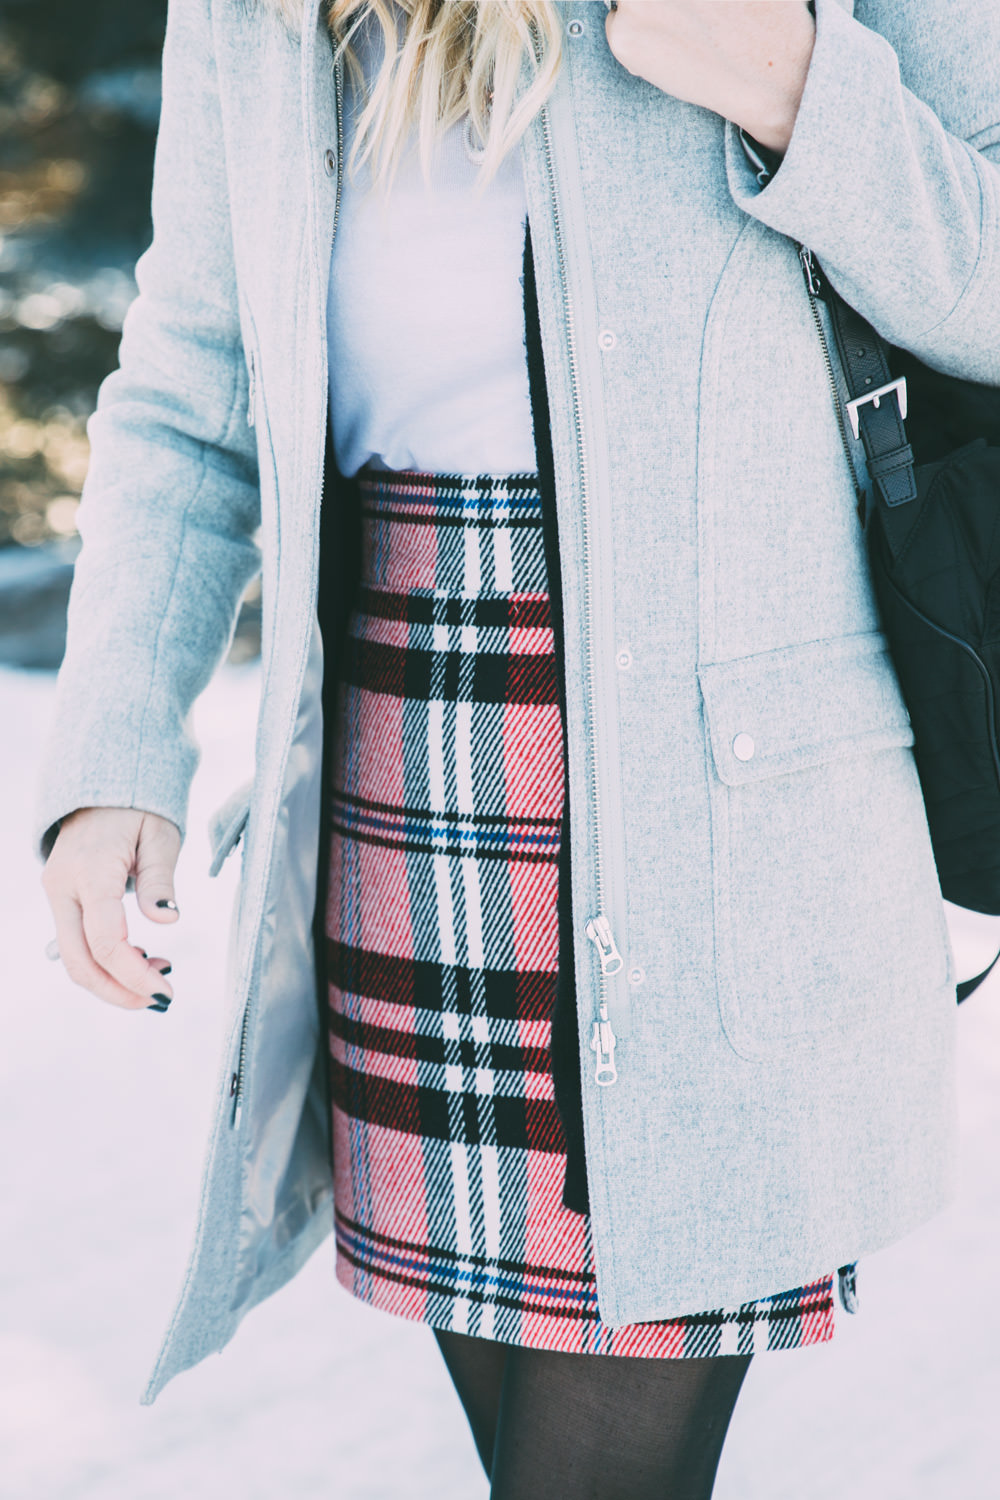 Caitlin Lindquist of the travel blog Dash of Darling shares a holiday winter outfit with Bronzallure in a Topshop plaid skirt, Club Monaco sweater and J.Crew fur hood coat.